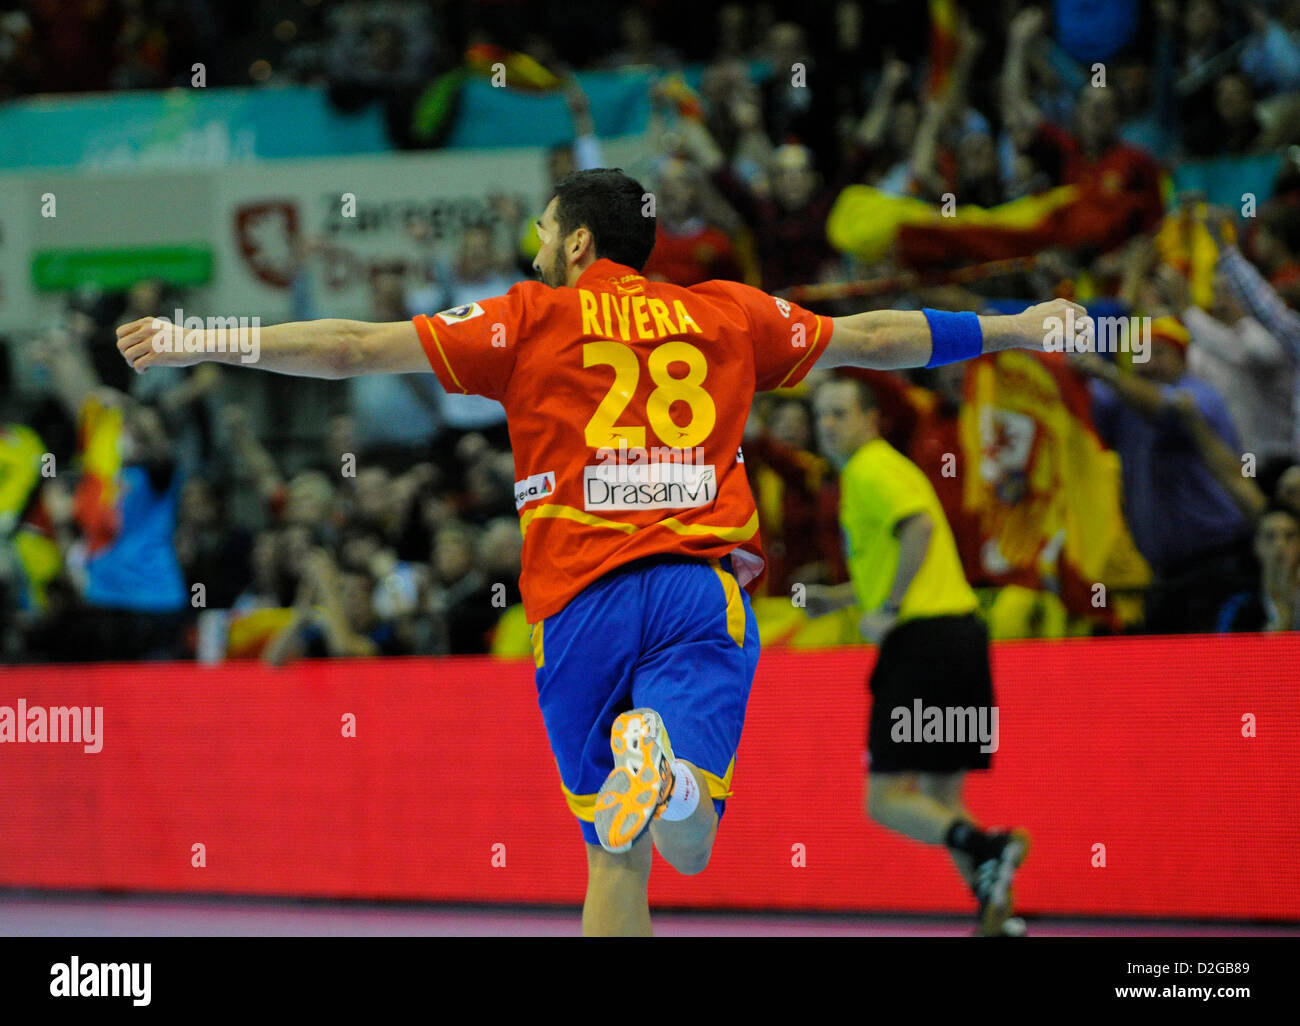 Zaragoza, Spain. 23rd January 2013.   World Championship  Handball. Match between Spain versus  Germay at the stadium Principe Felipe. The picture shows  Valero Rivera Folch (Left Wing of Spain)  Spain won by a score of 28-24. Credit:  Action Plus Sports Images / Alamy Live News Stock Photo